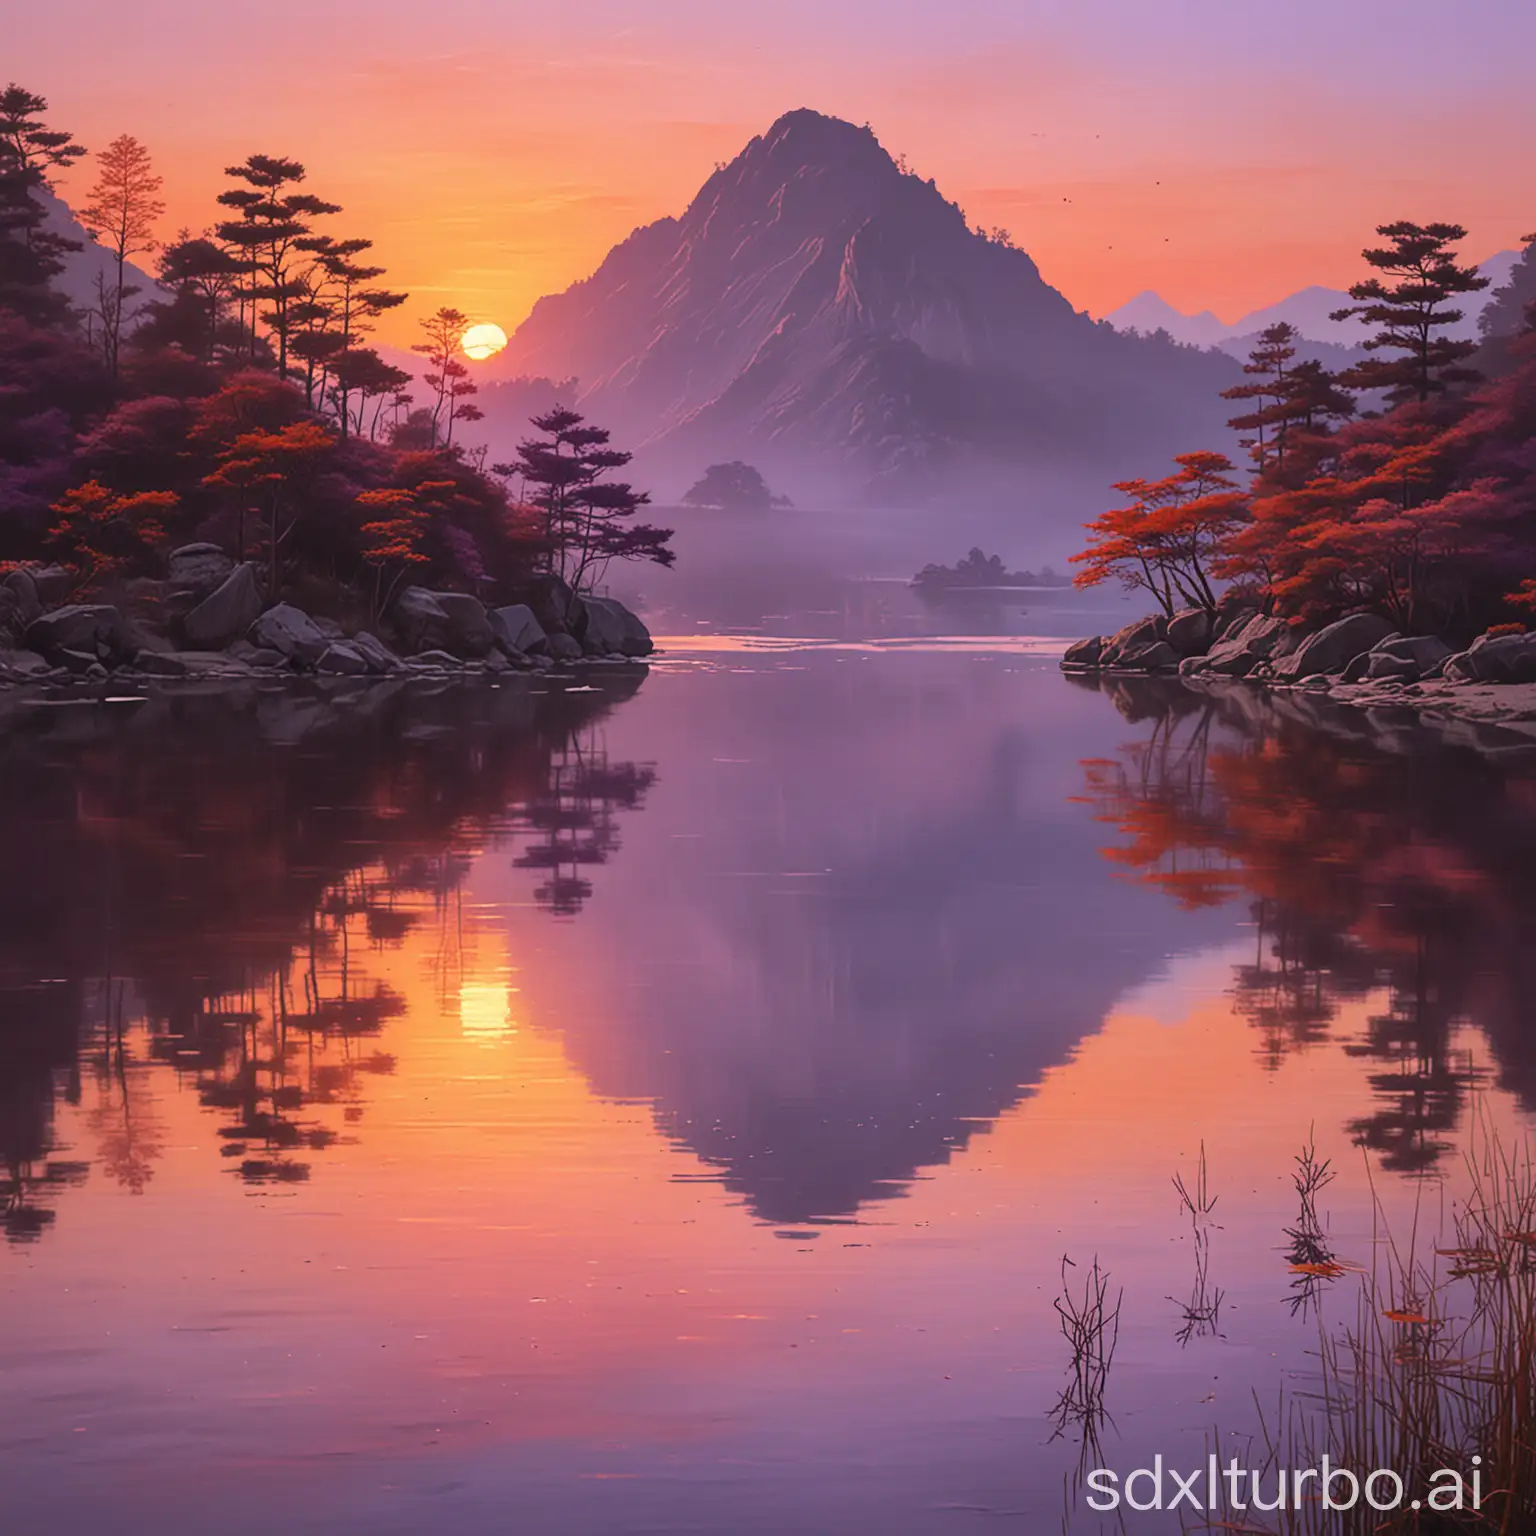 (sunset:1.5) A tranquil and peaceful lake at sunset, with orange and purple light reflecting on the water, like a Chinese mountain-and-water painting in the background